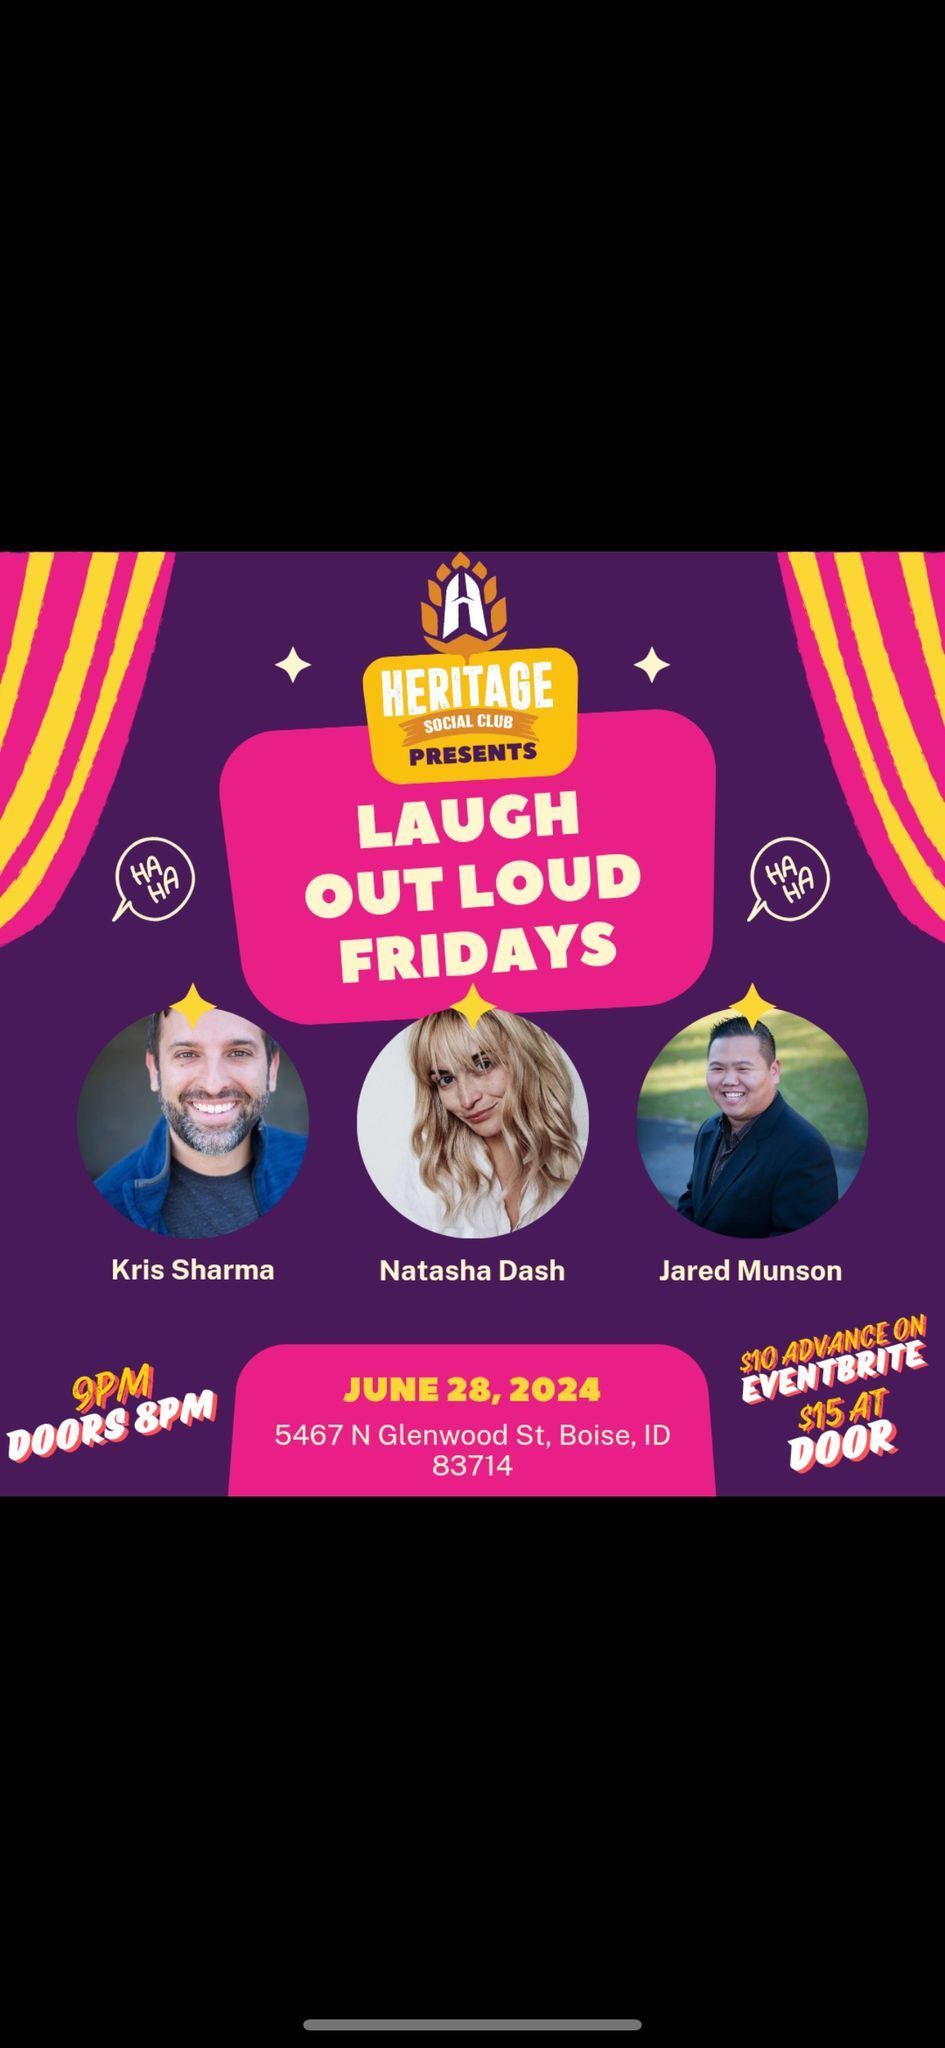 Heritage Social Presents Laugh out Loud Fridays 